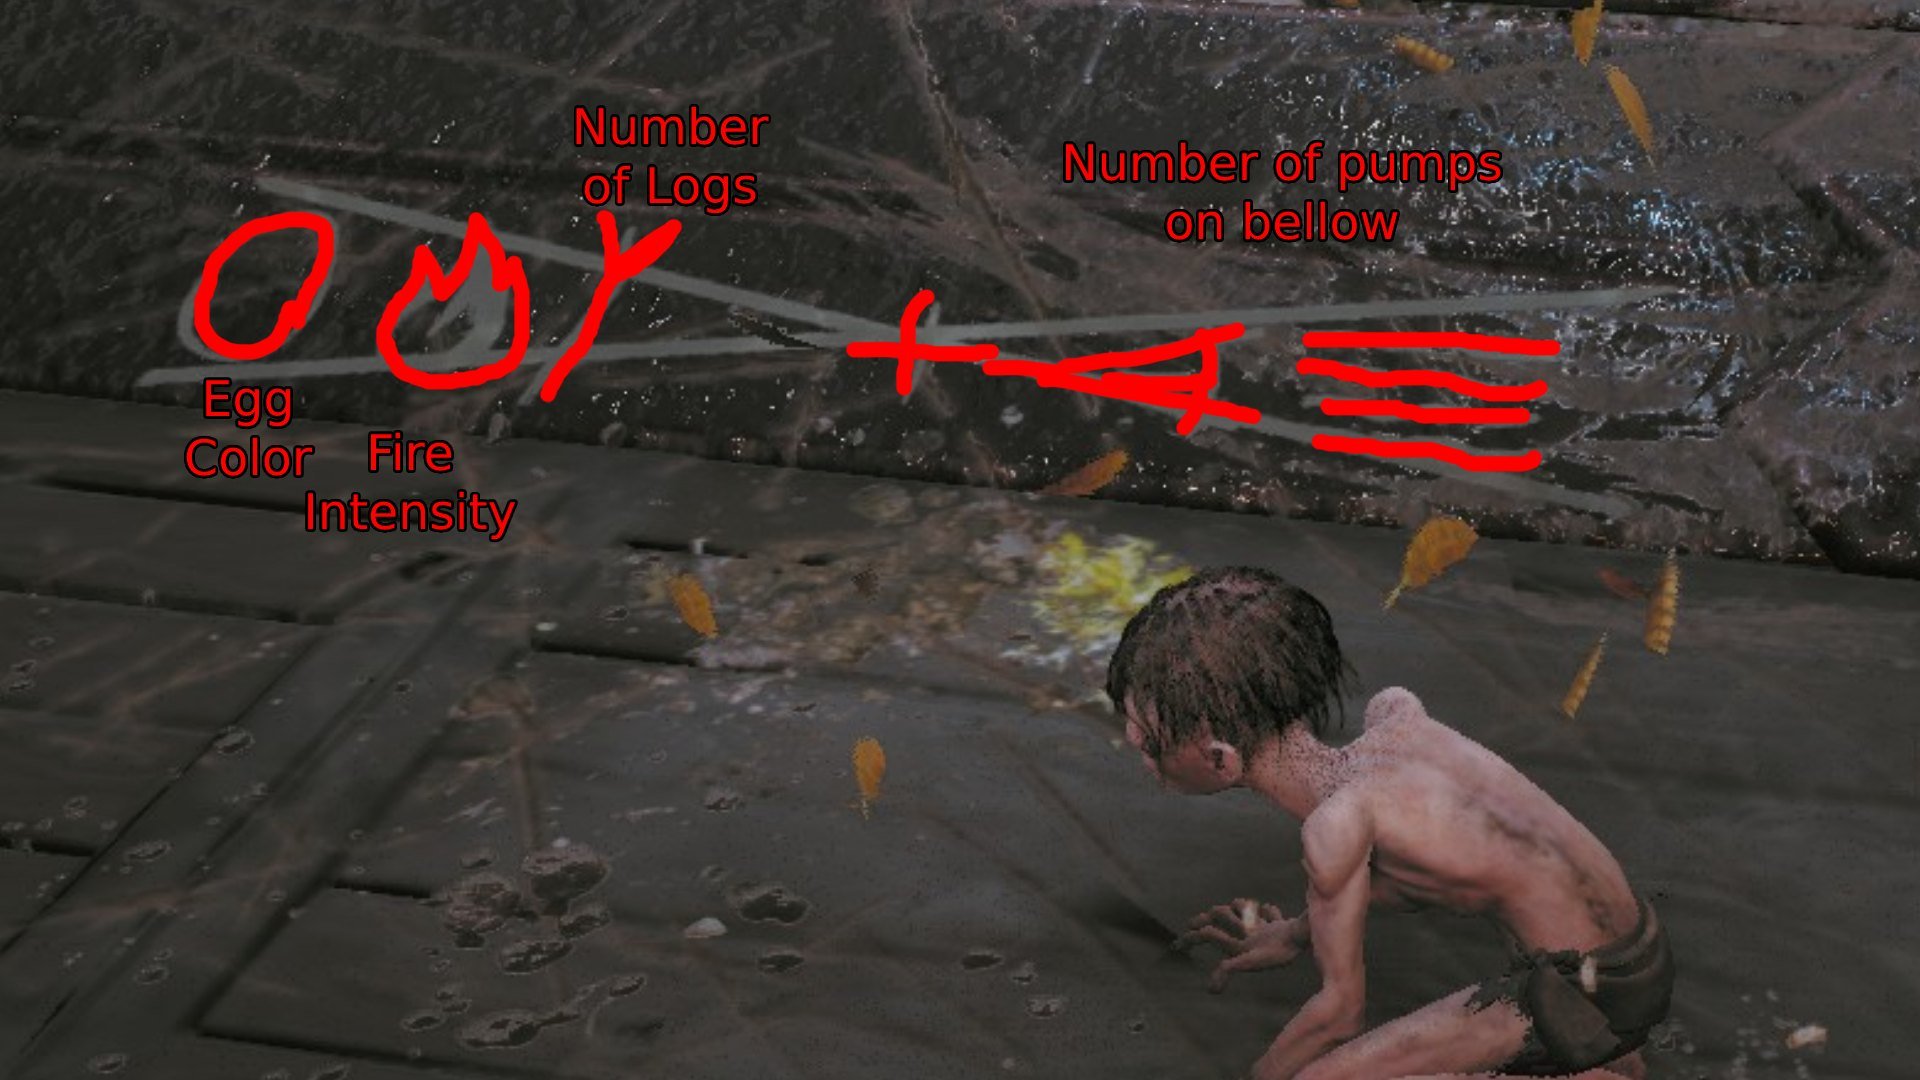 Gollum screenshot showing a puzzle clue that has been annotated over with big red letters and scrawlings. 